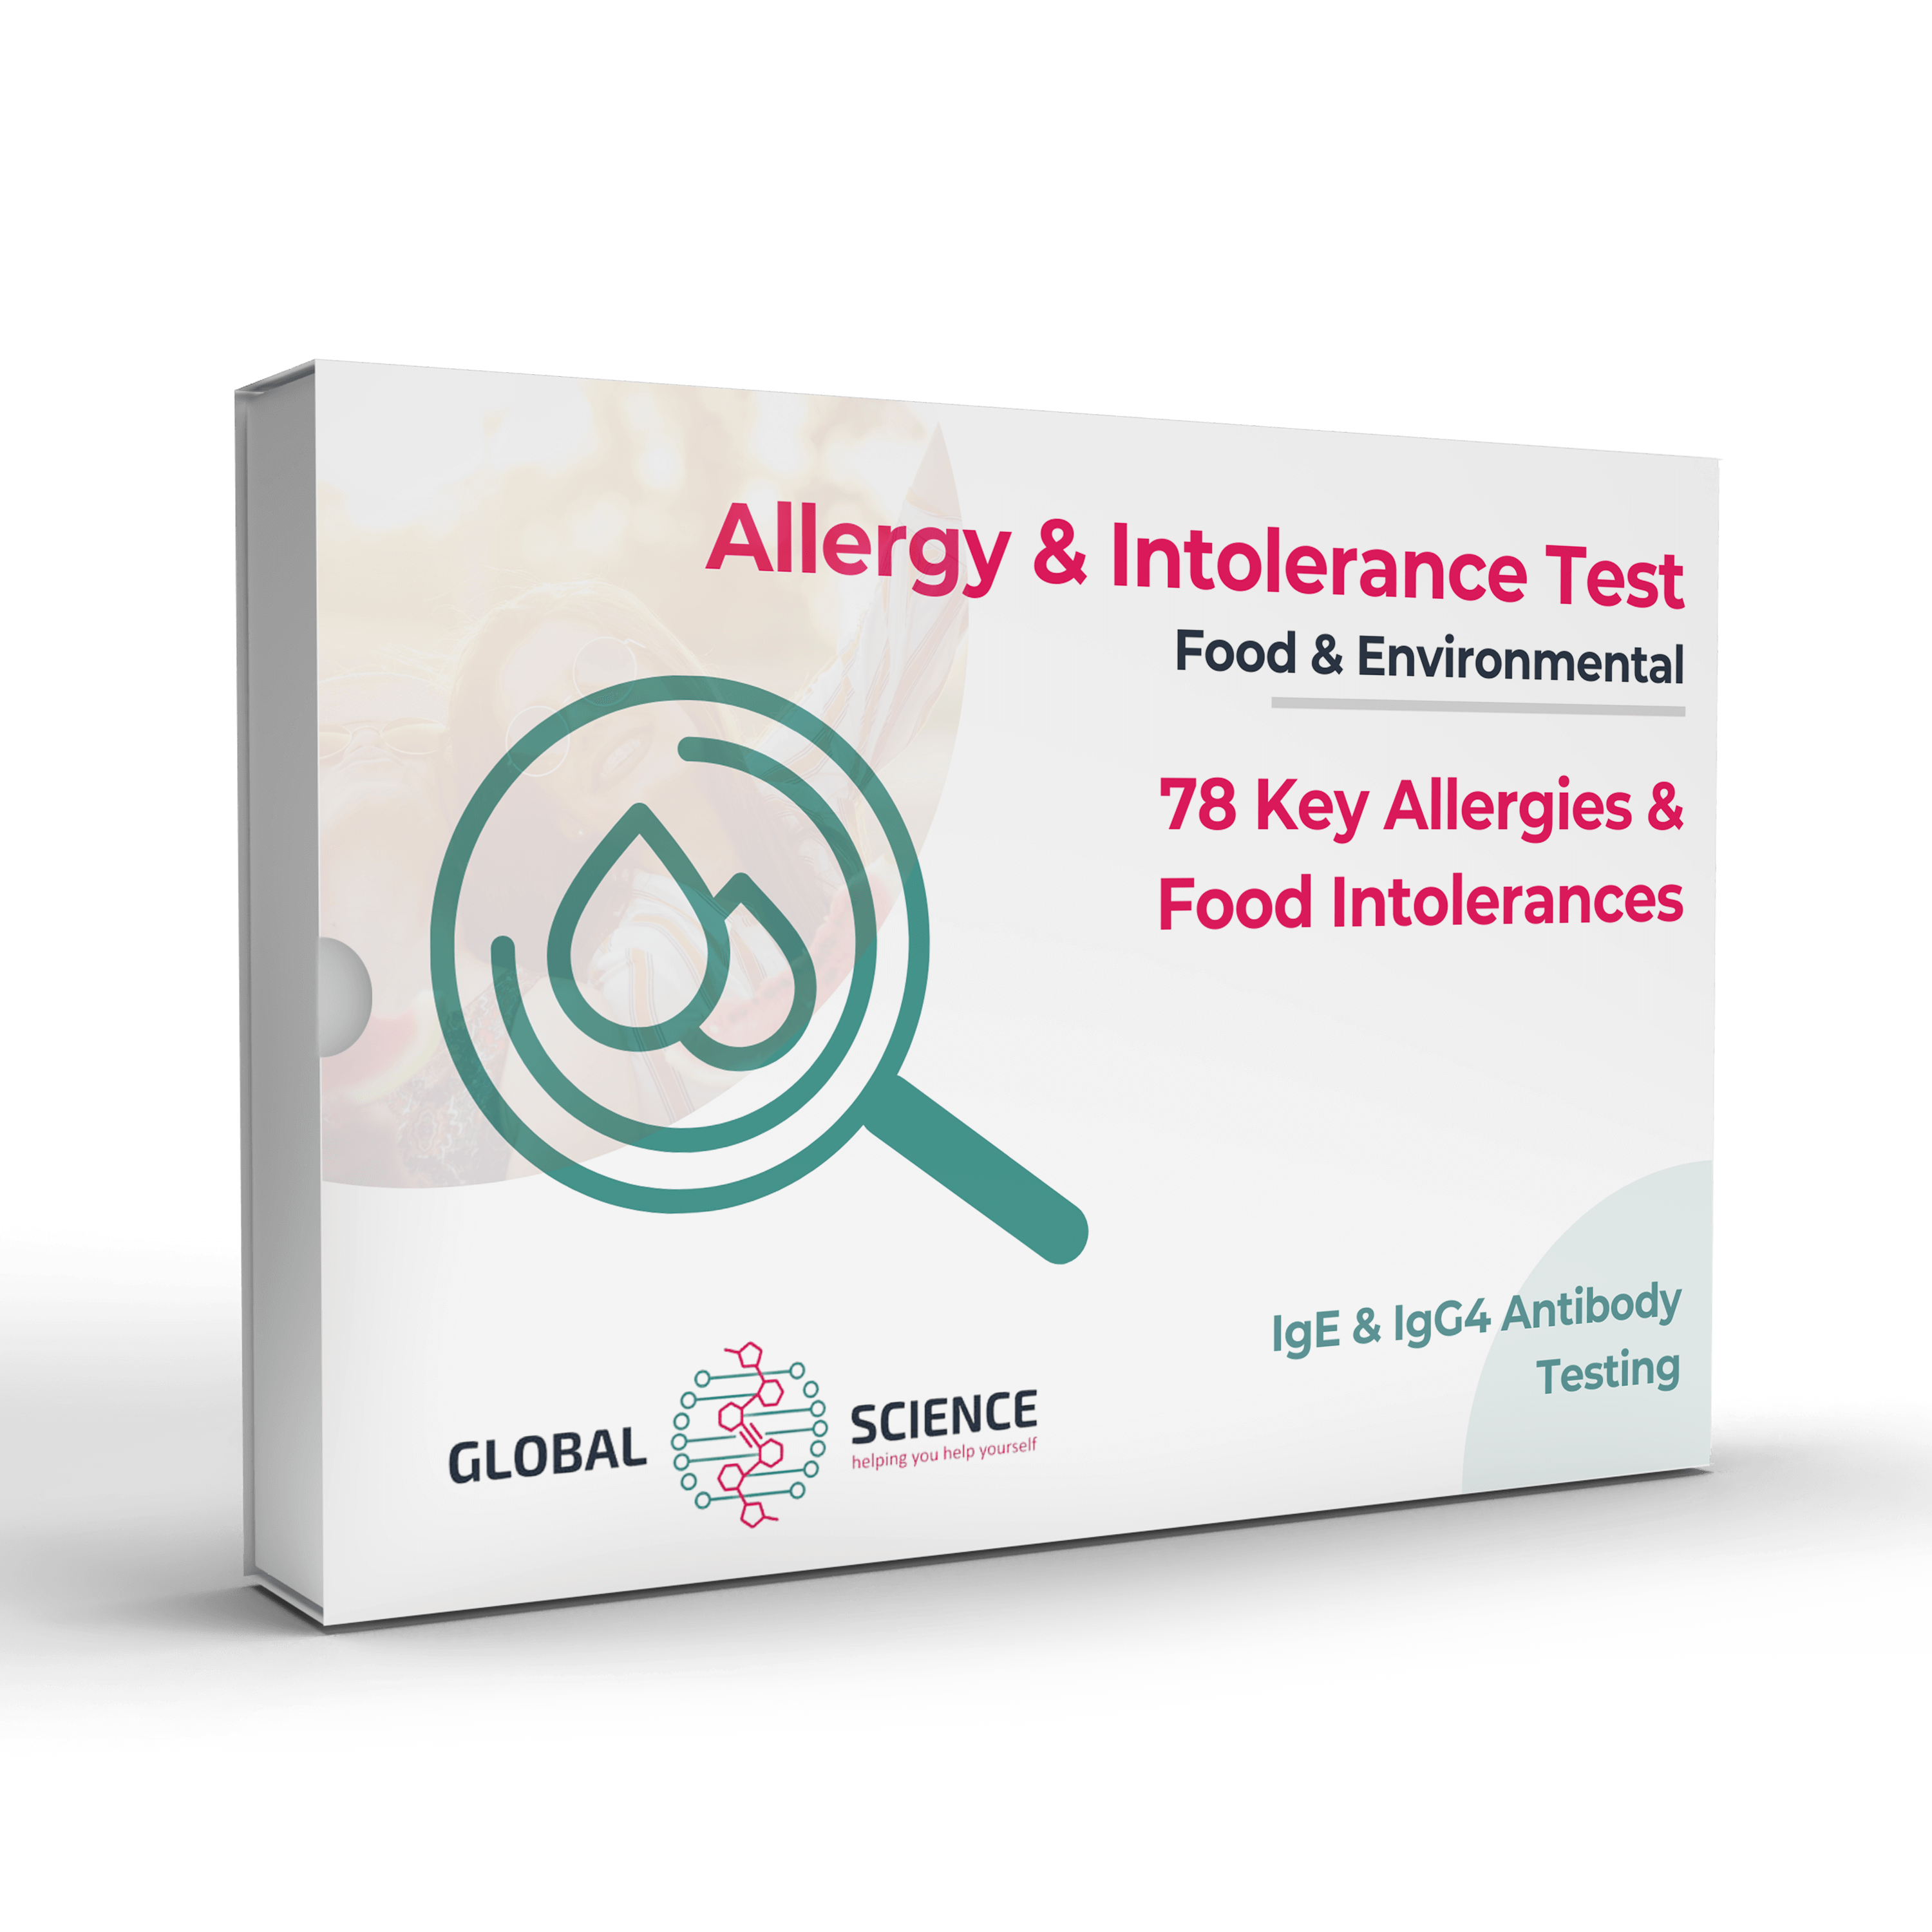 TMI TMA Allergy and Intolerance Test - Food Intolerance Facts